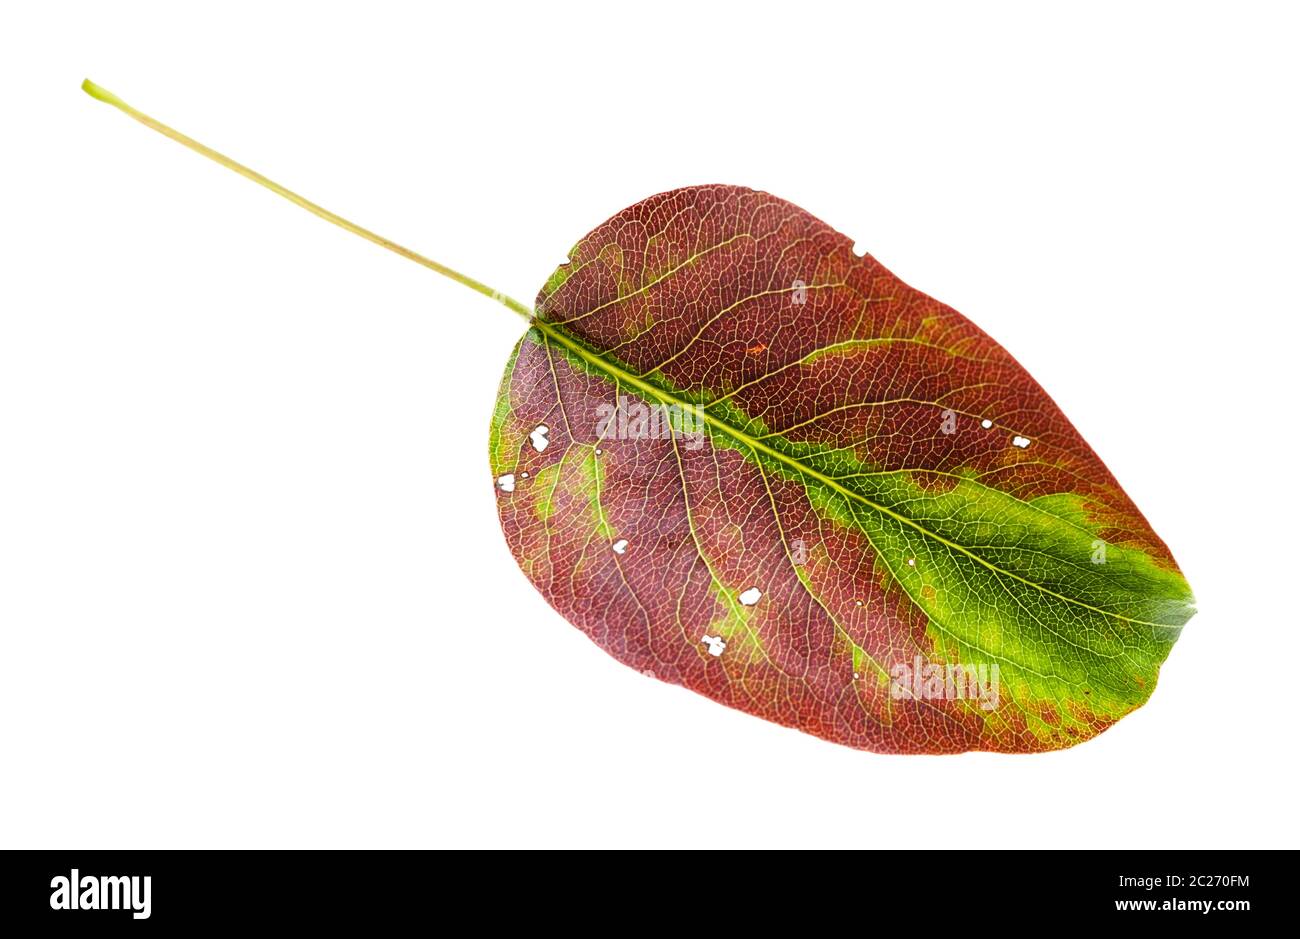 brown and green fallen leaf of pear tree isolated on white background Stock Photo